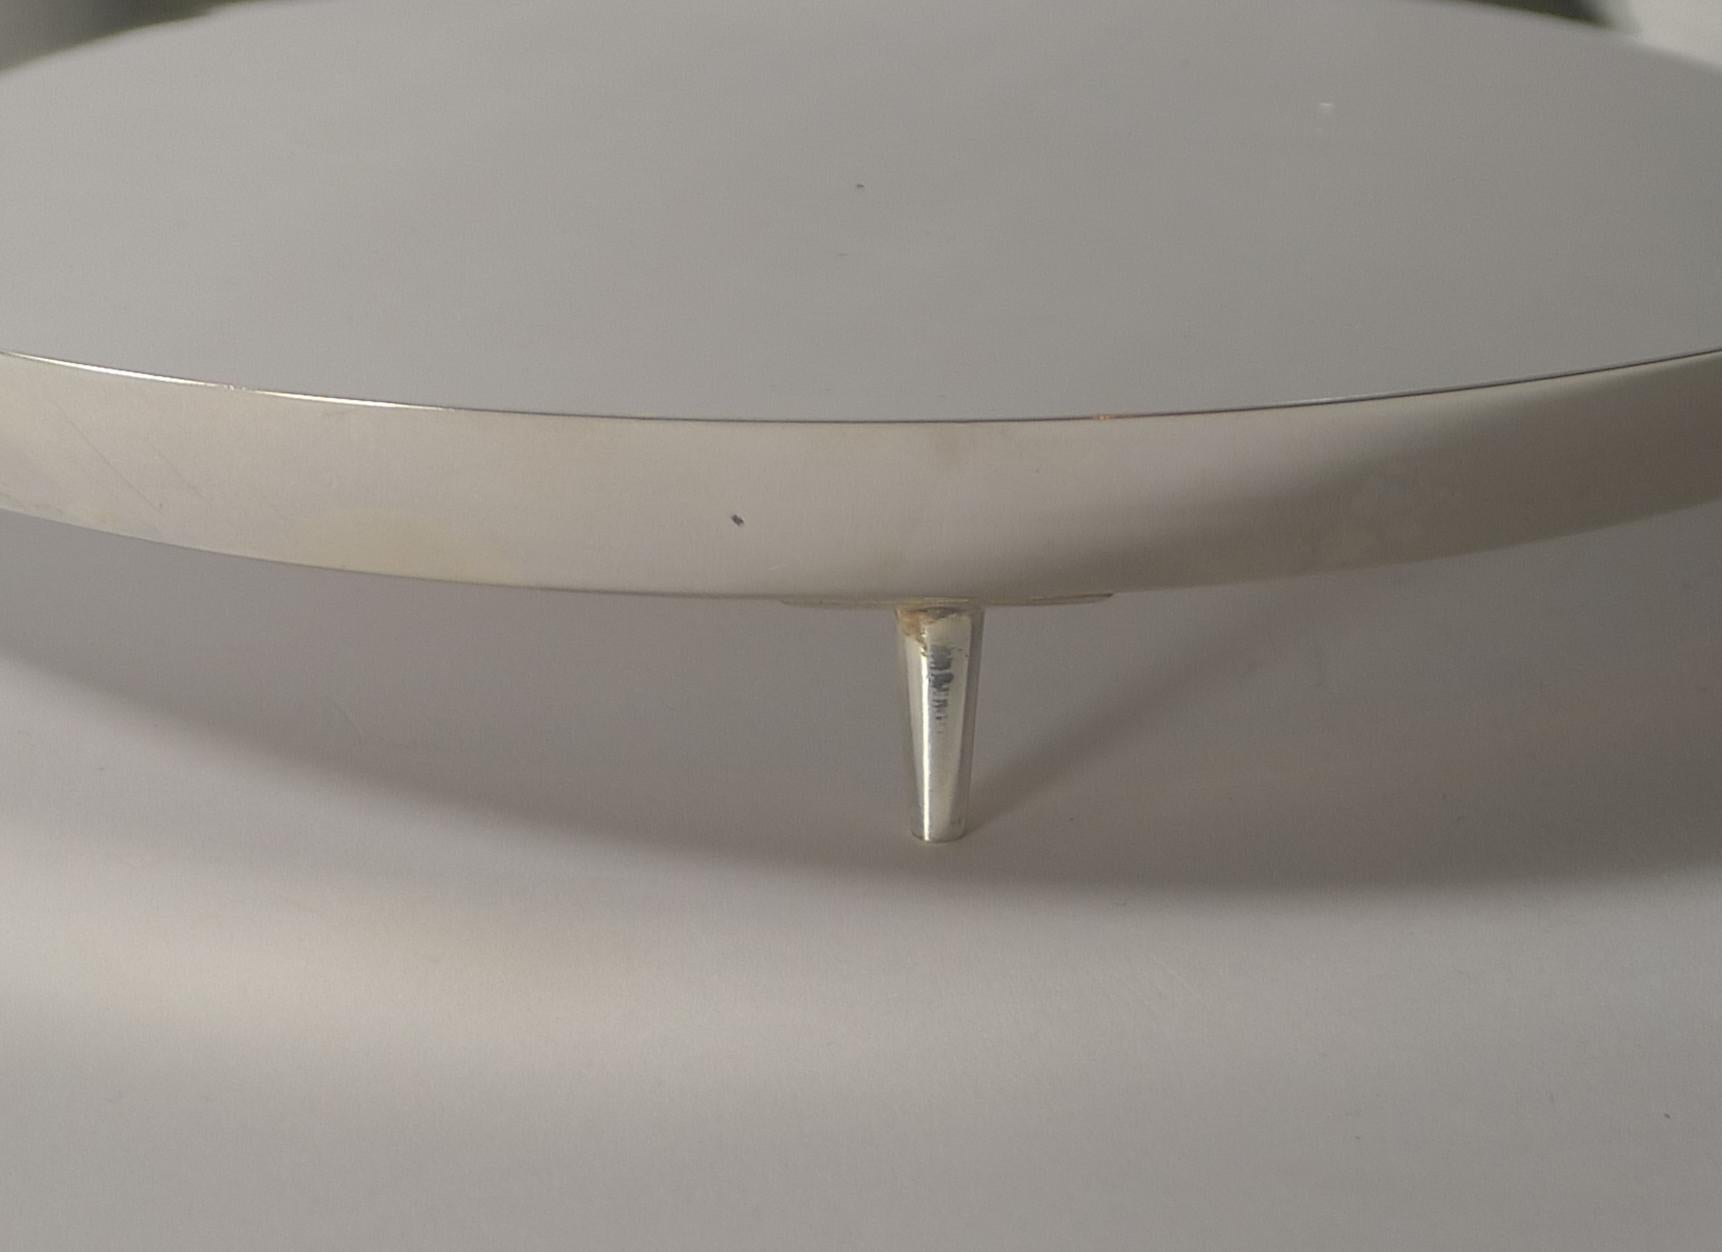 A stunning silver plated circular cocktail tray, futuristic in style with a modernist look, a simple circular galleried shape standing on three pin legs.

Fully marked on the underside for the highly collectable silversmith, Hukin and Heath and the